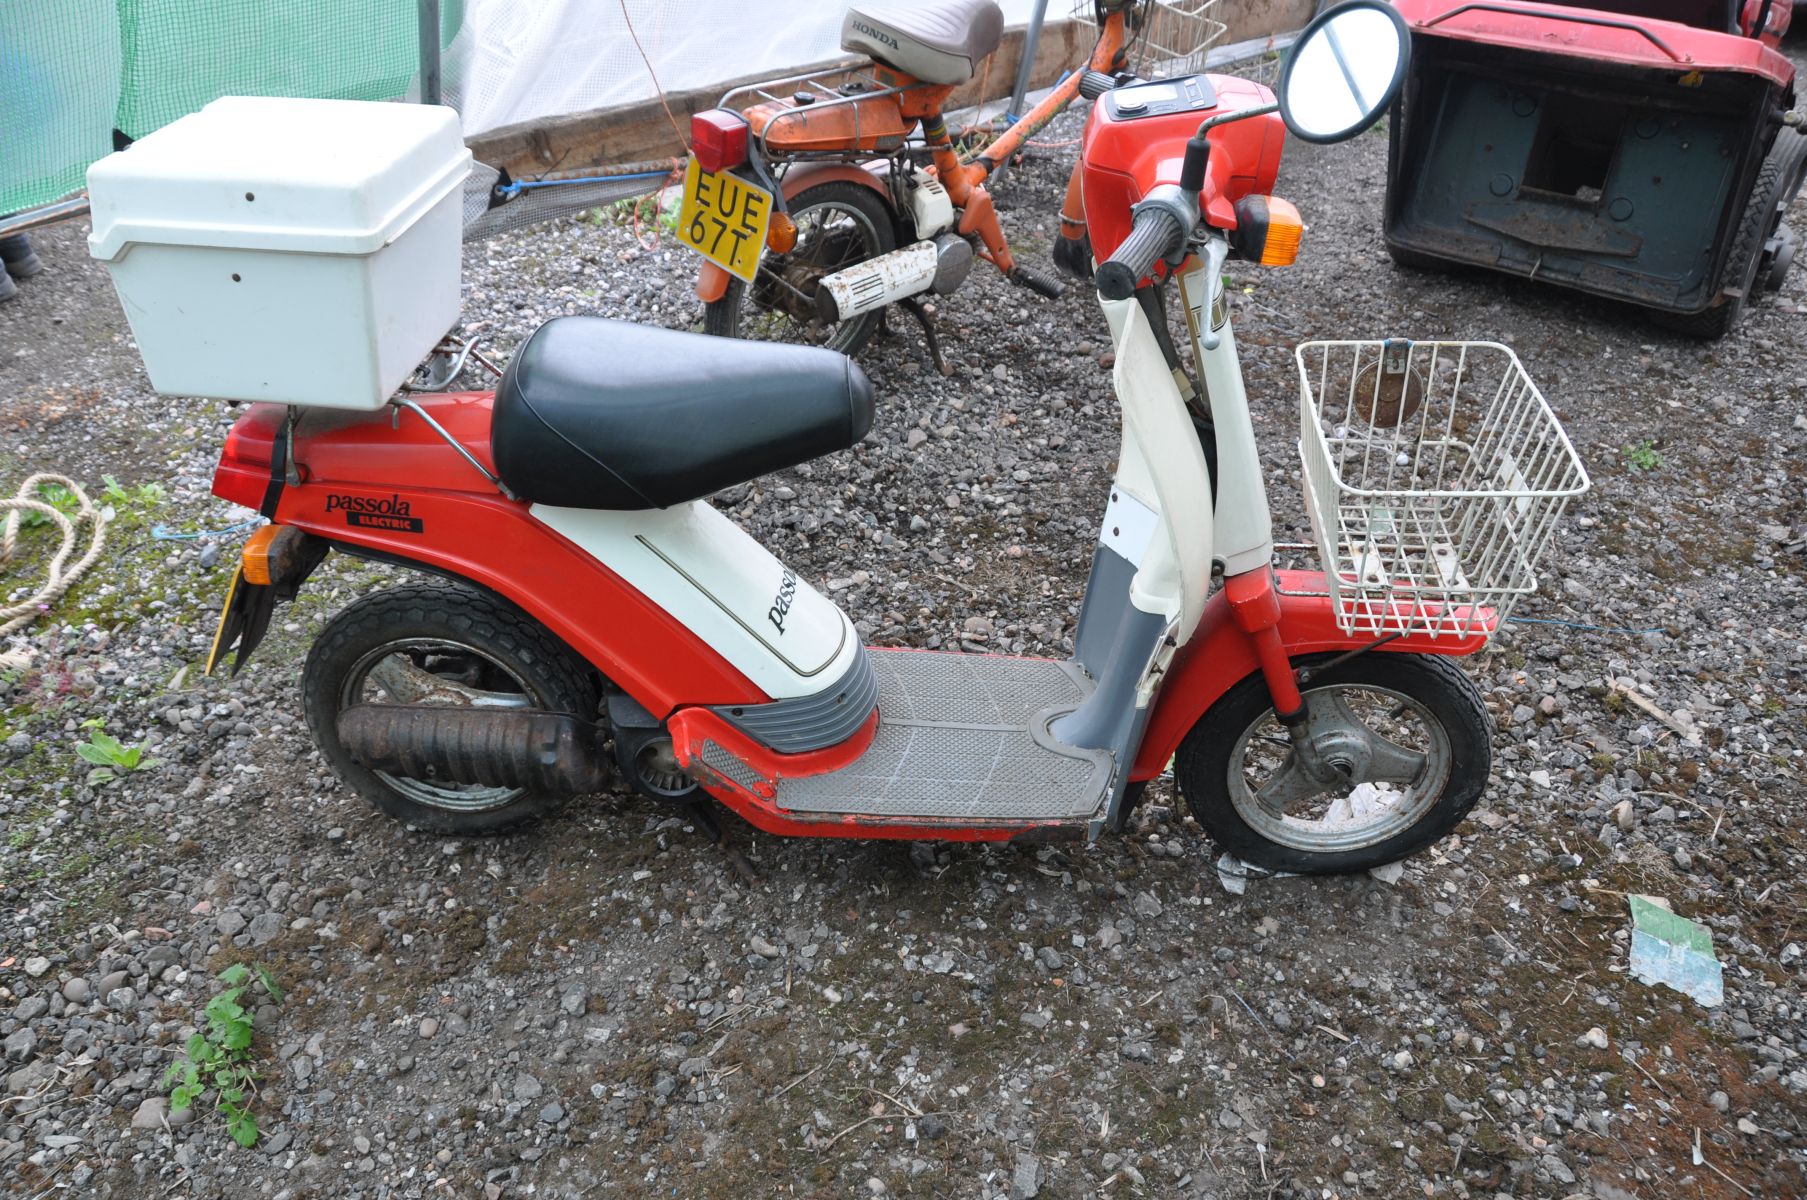 A 1983 YAMAHA PASSOLA 49cc MOPED in red and cream, no keys, no V5, first Registered 02/1983 under - Image 2 of 4